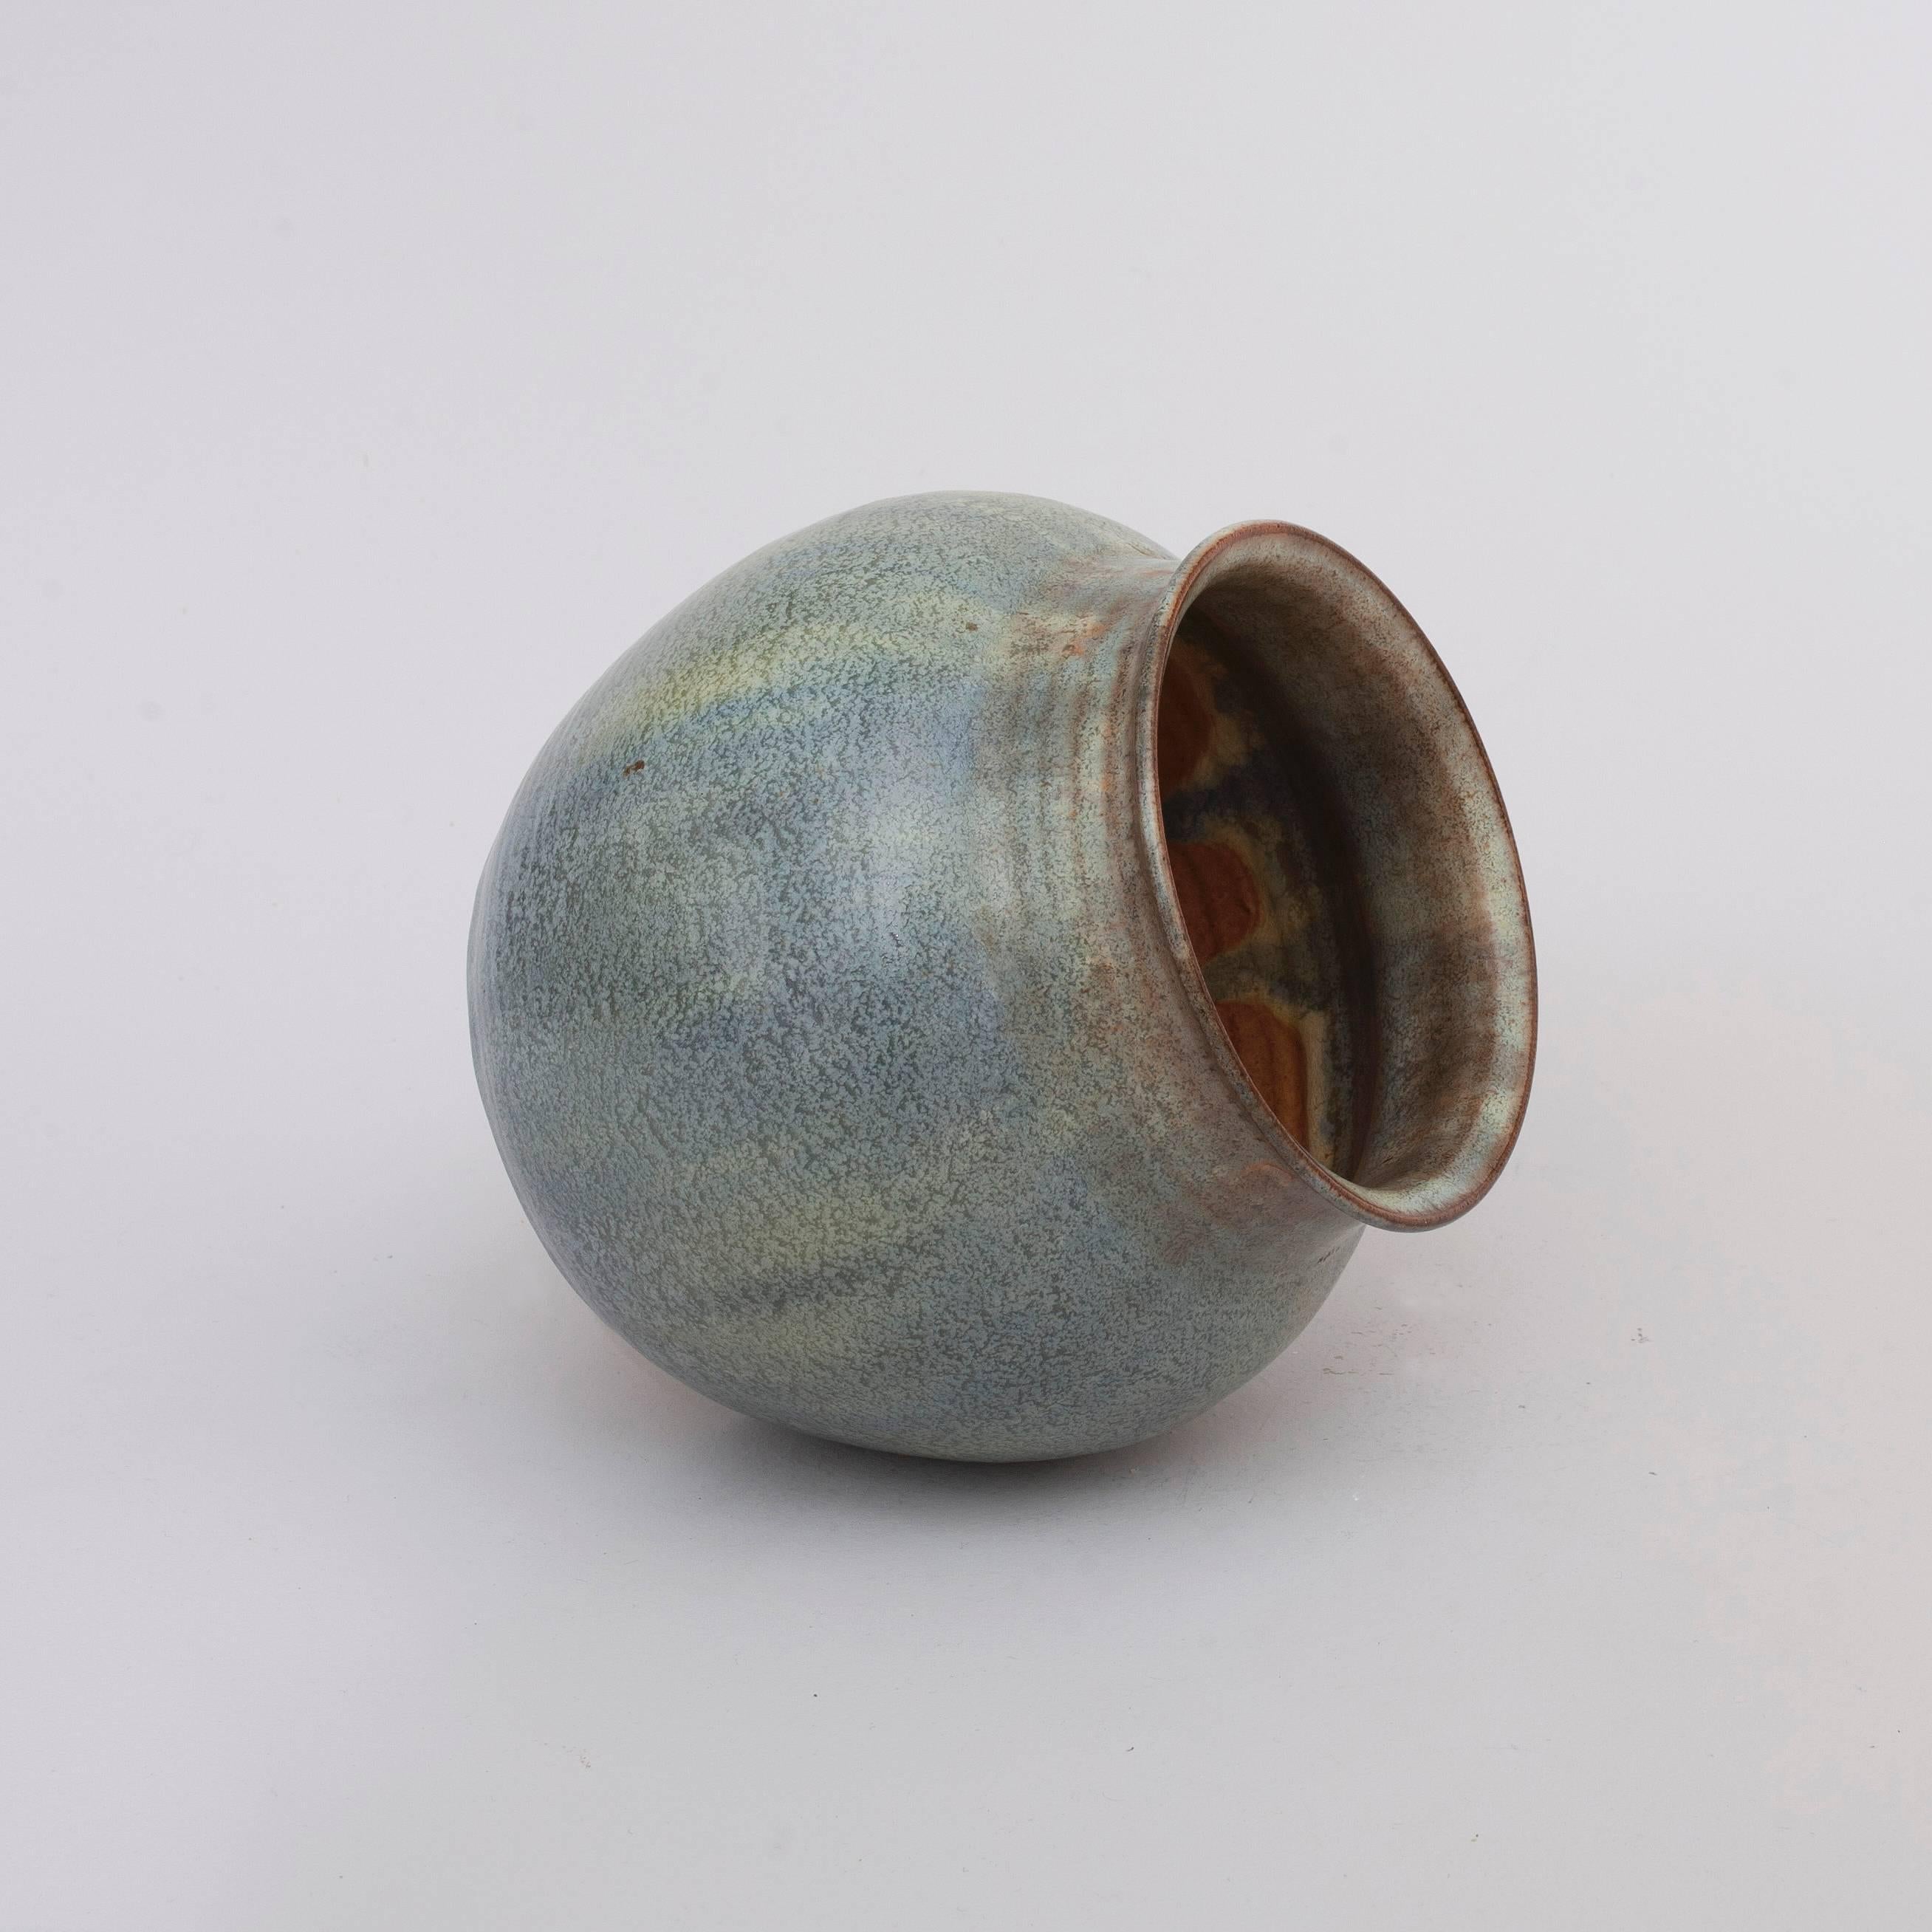 Small ceramic vase by Dutch sculptor and ceramist W.C. Brouwer, made in his own workshop. The vase is signed by Brouwer on the bottom.